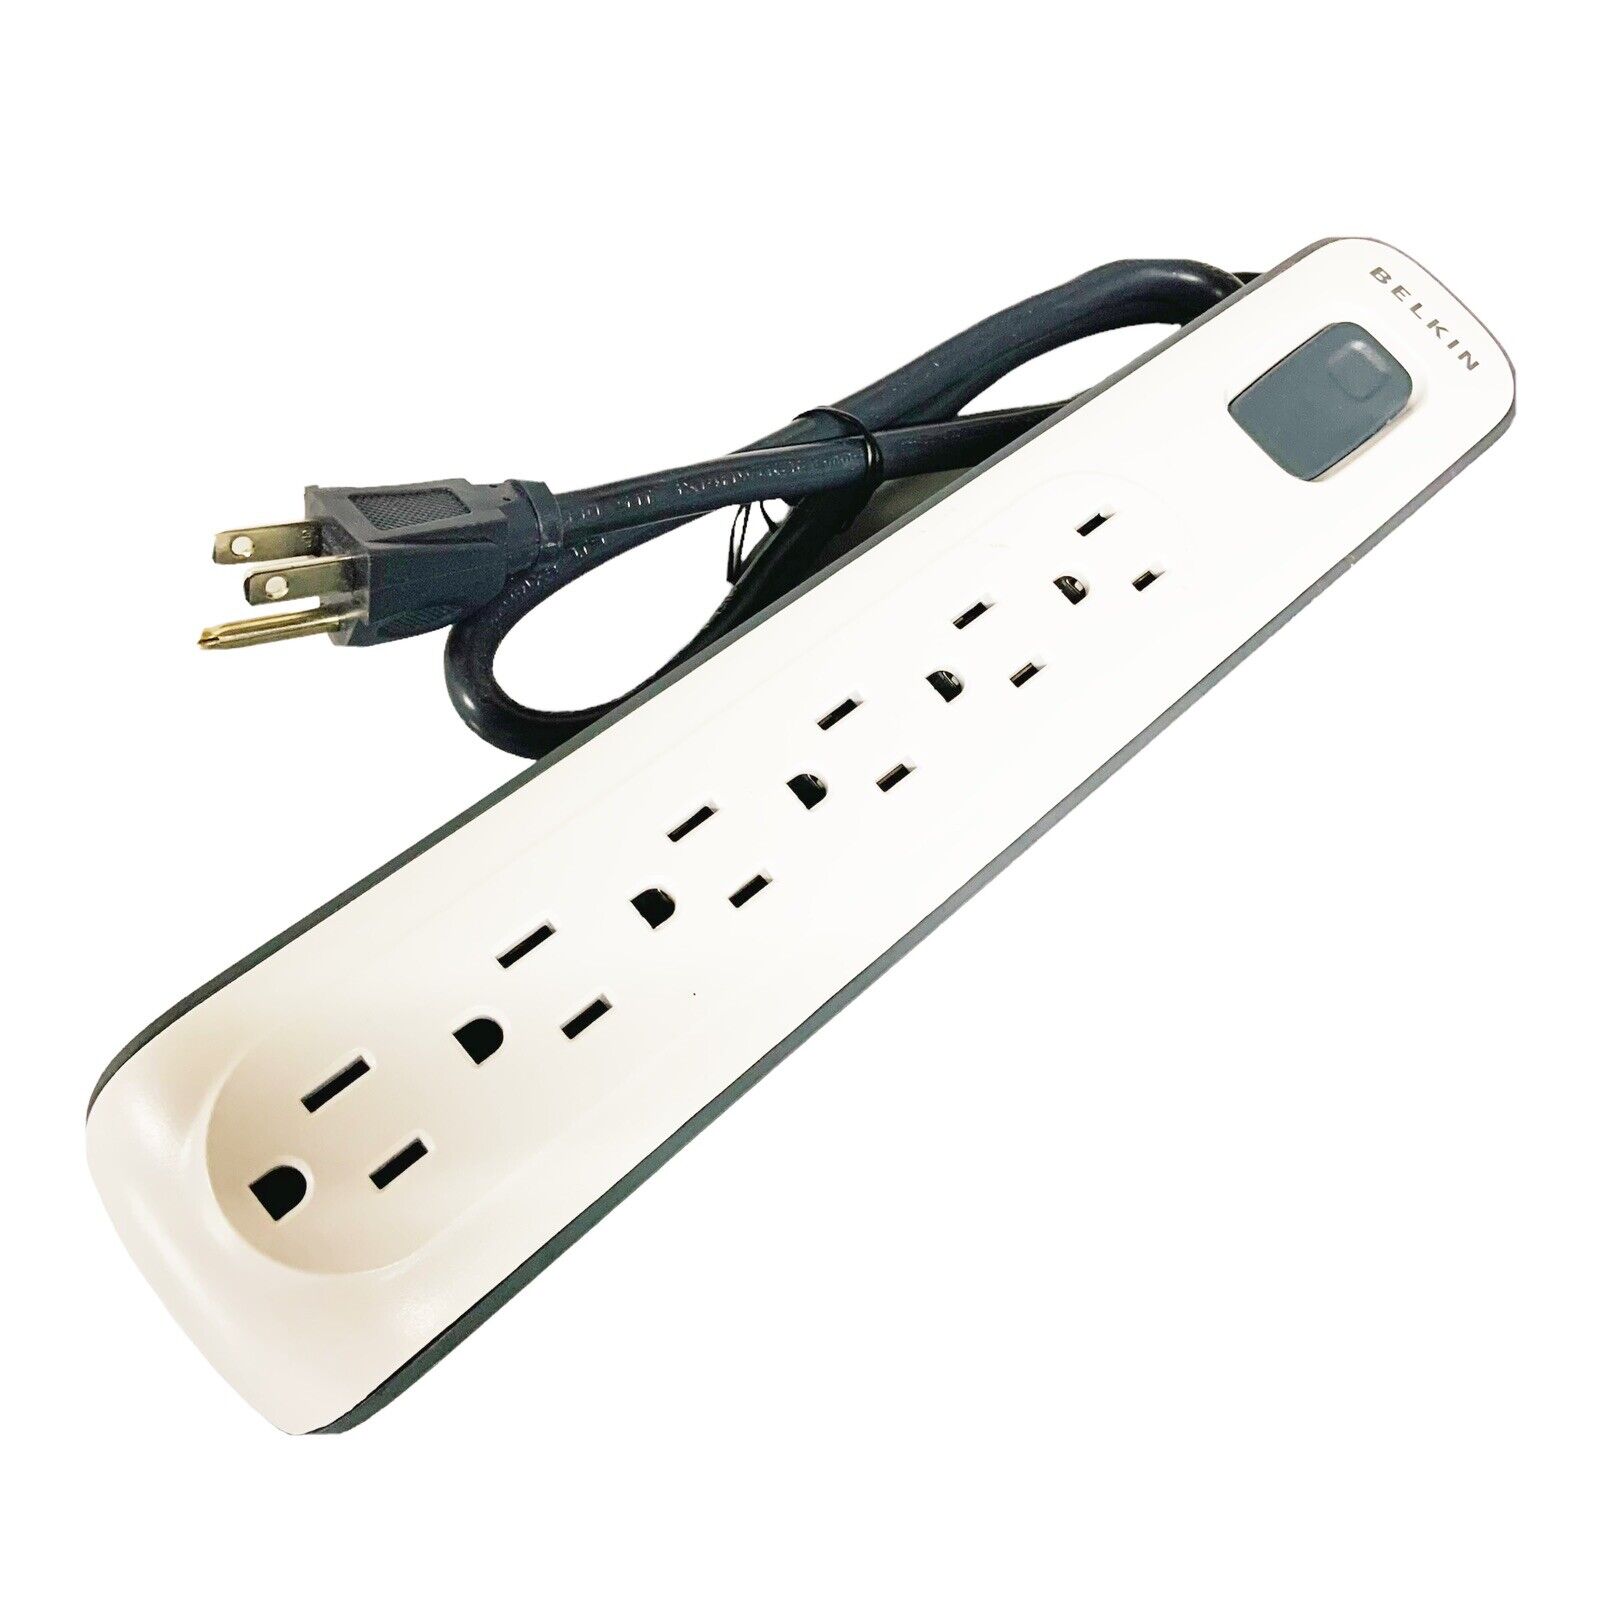 Belkin 6 Outlet Power Strip Surge Protector White Gray Short Cord BV106000-2.5